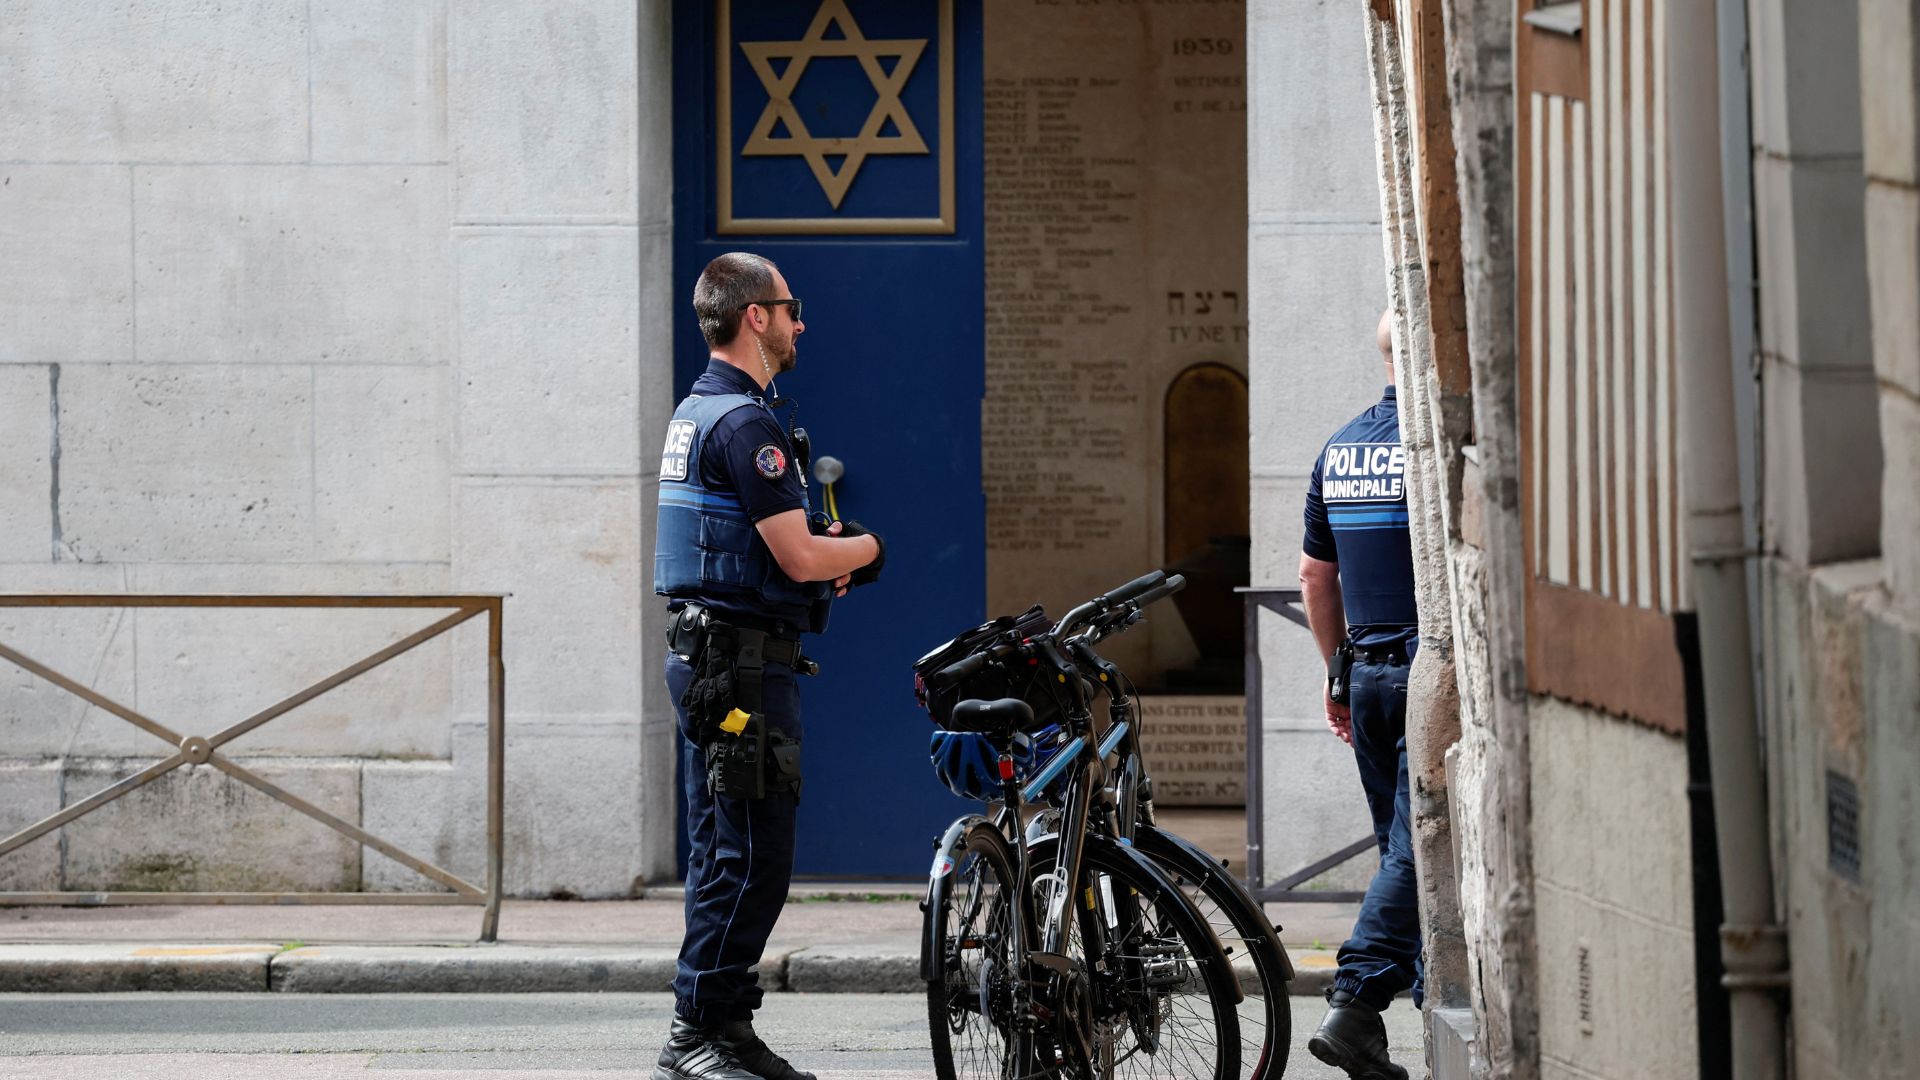 Police surround the synagogue. /Gonzalo Fuentes/Reuters